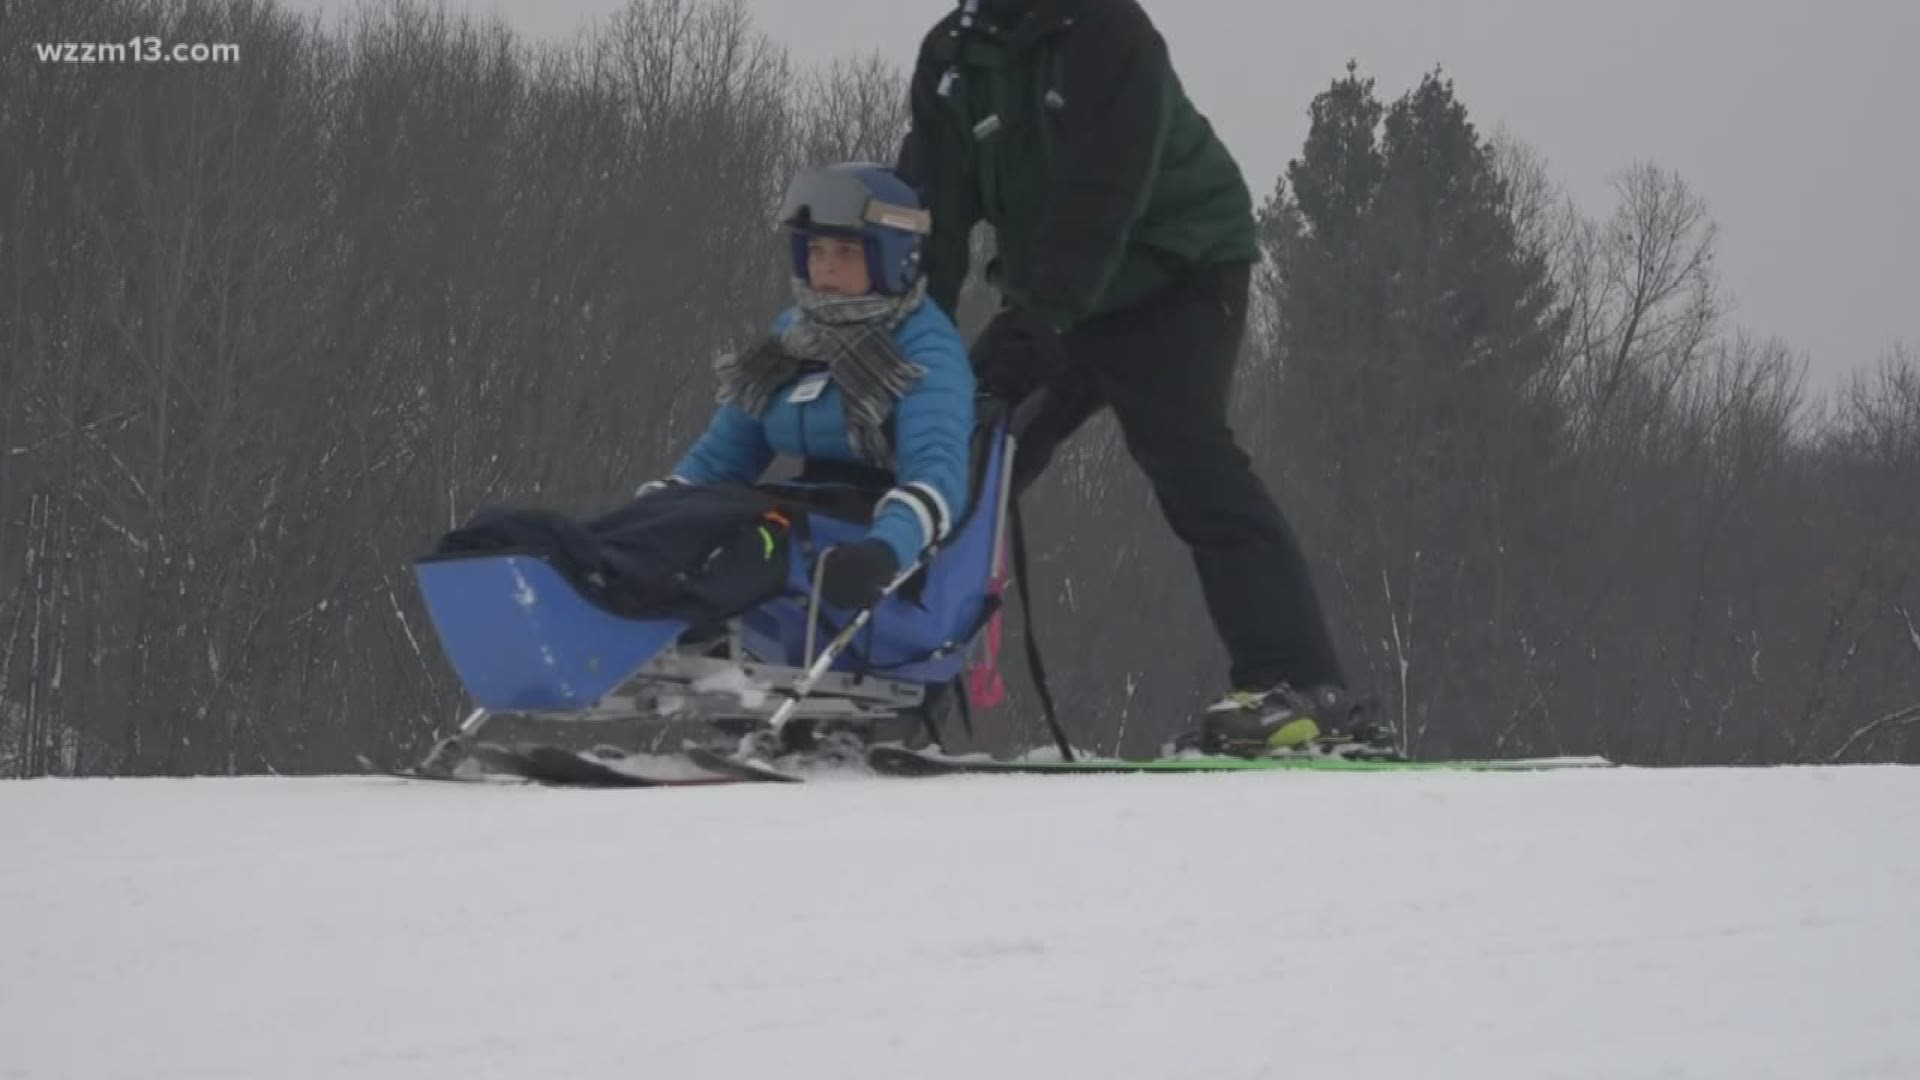 About 22 former Mary Free Bed patients took to the Cannonsburg Ski Area slopes on Saturday. It was all part of 2019’s Adaptive Downhill Ski Clinic. The skiers were accompanied by around 47 ski instructor volunteers.